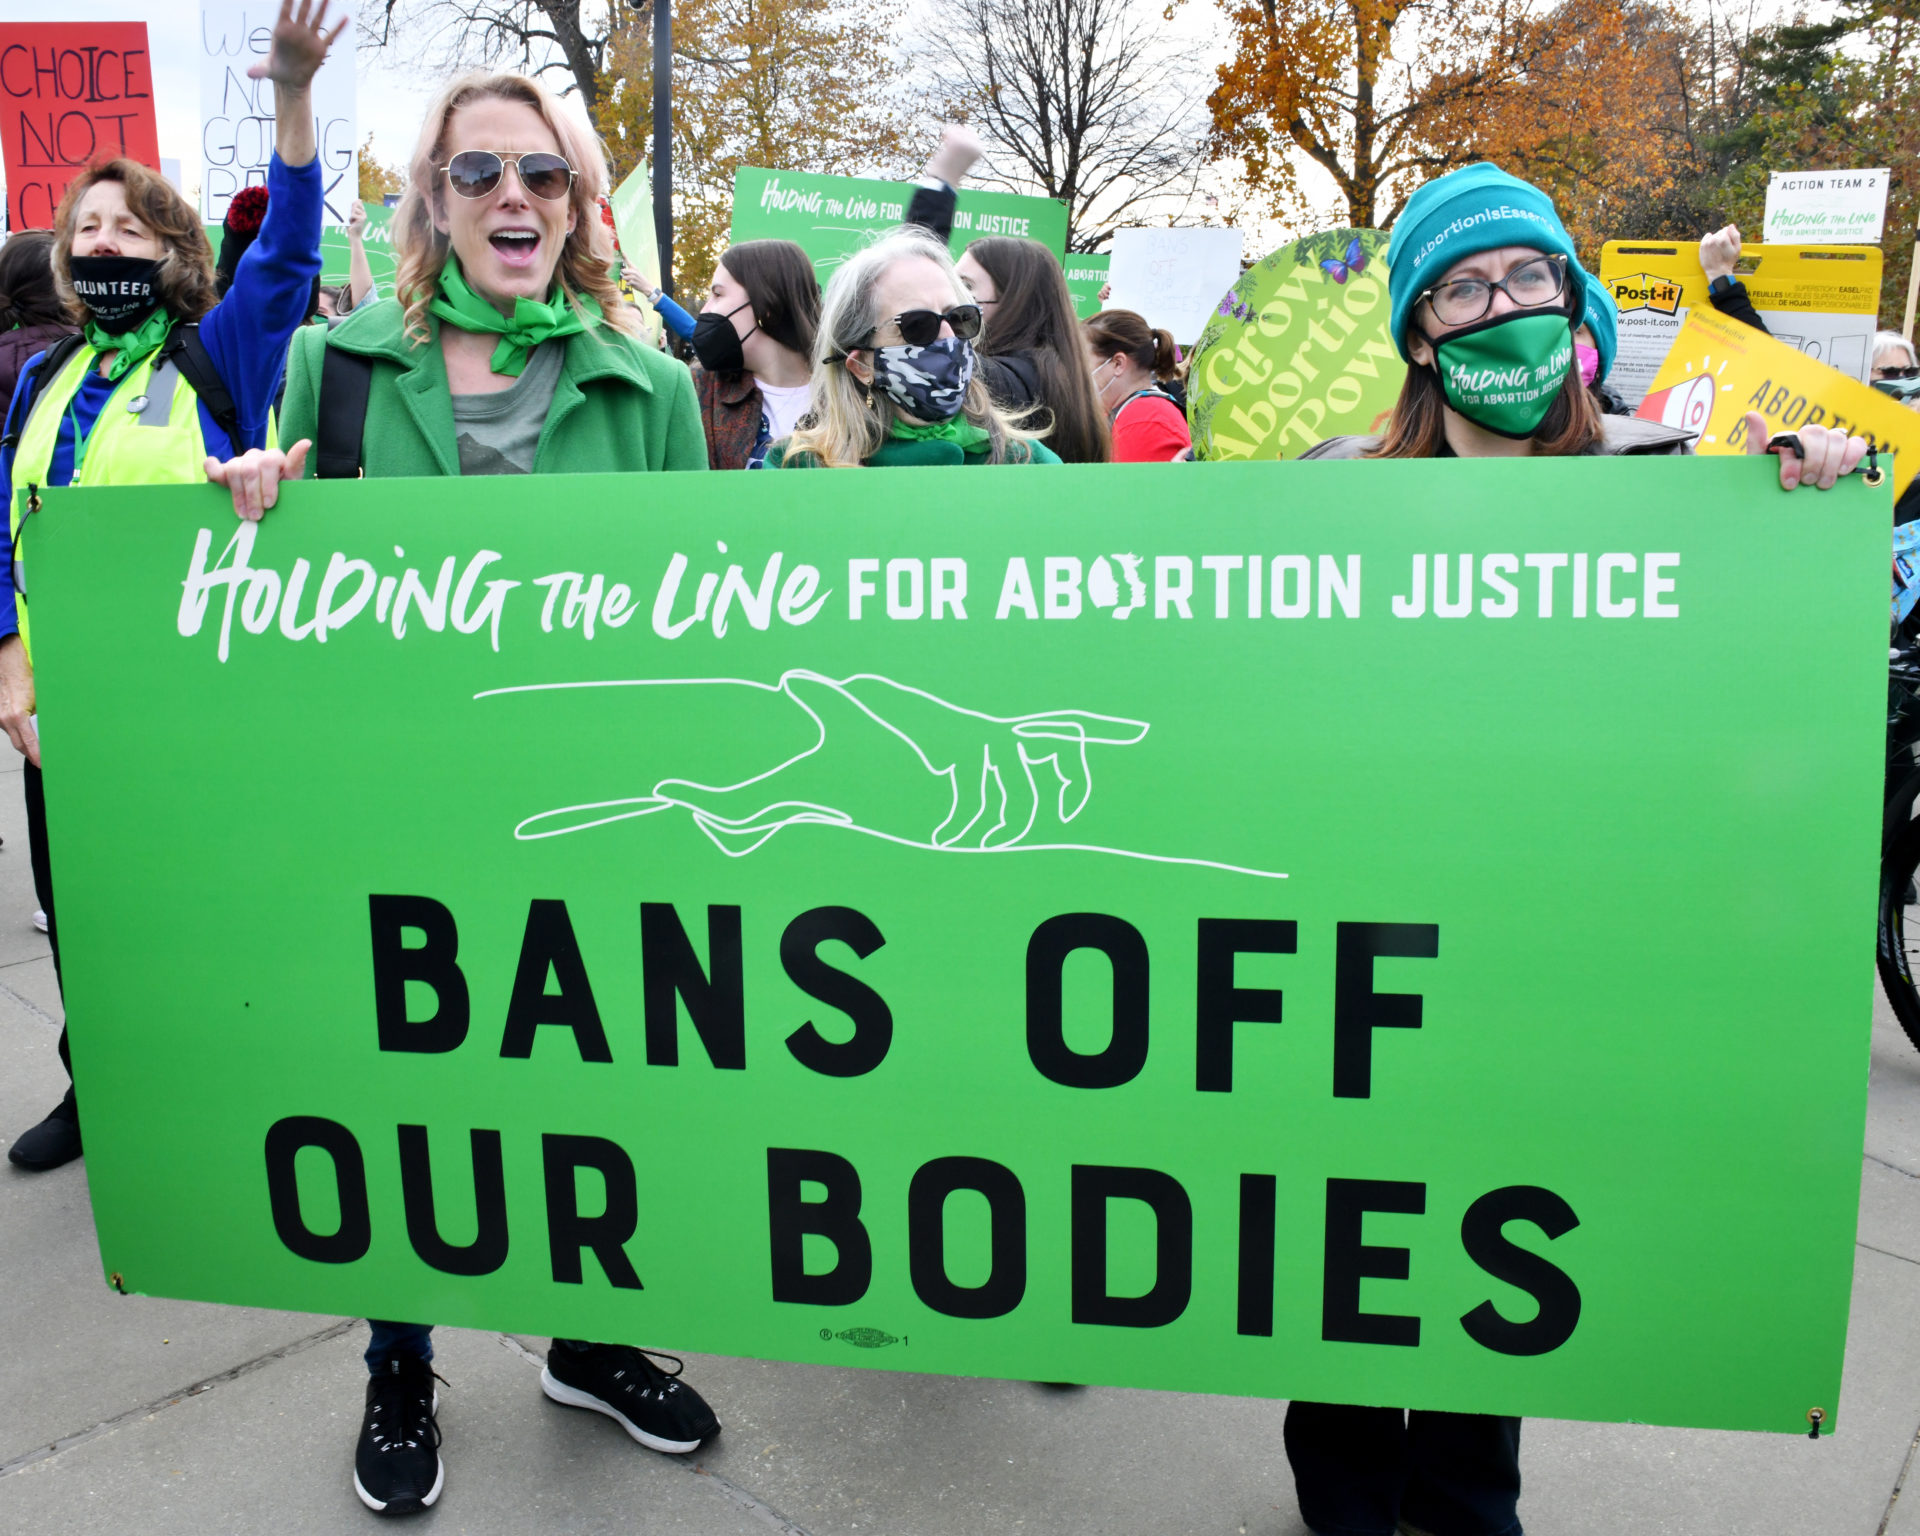 Participants at the Hold the Line for Abortion Justice rally at the U.S. Supreme Court